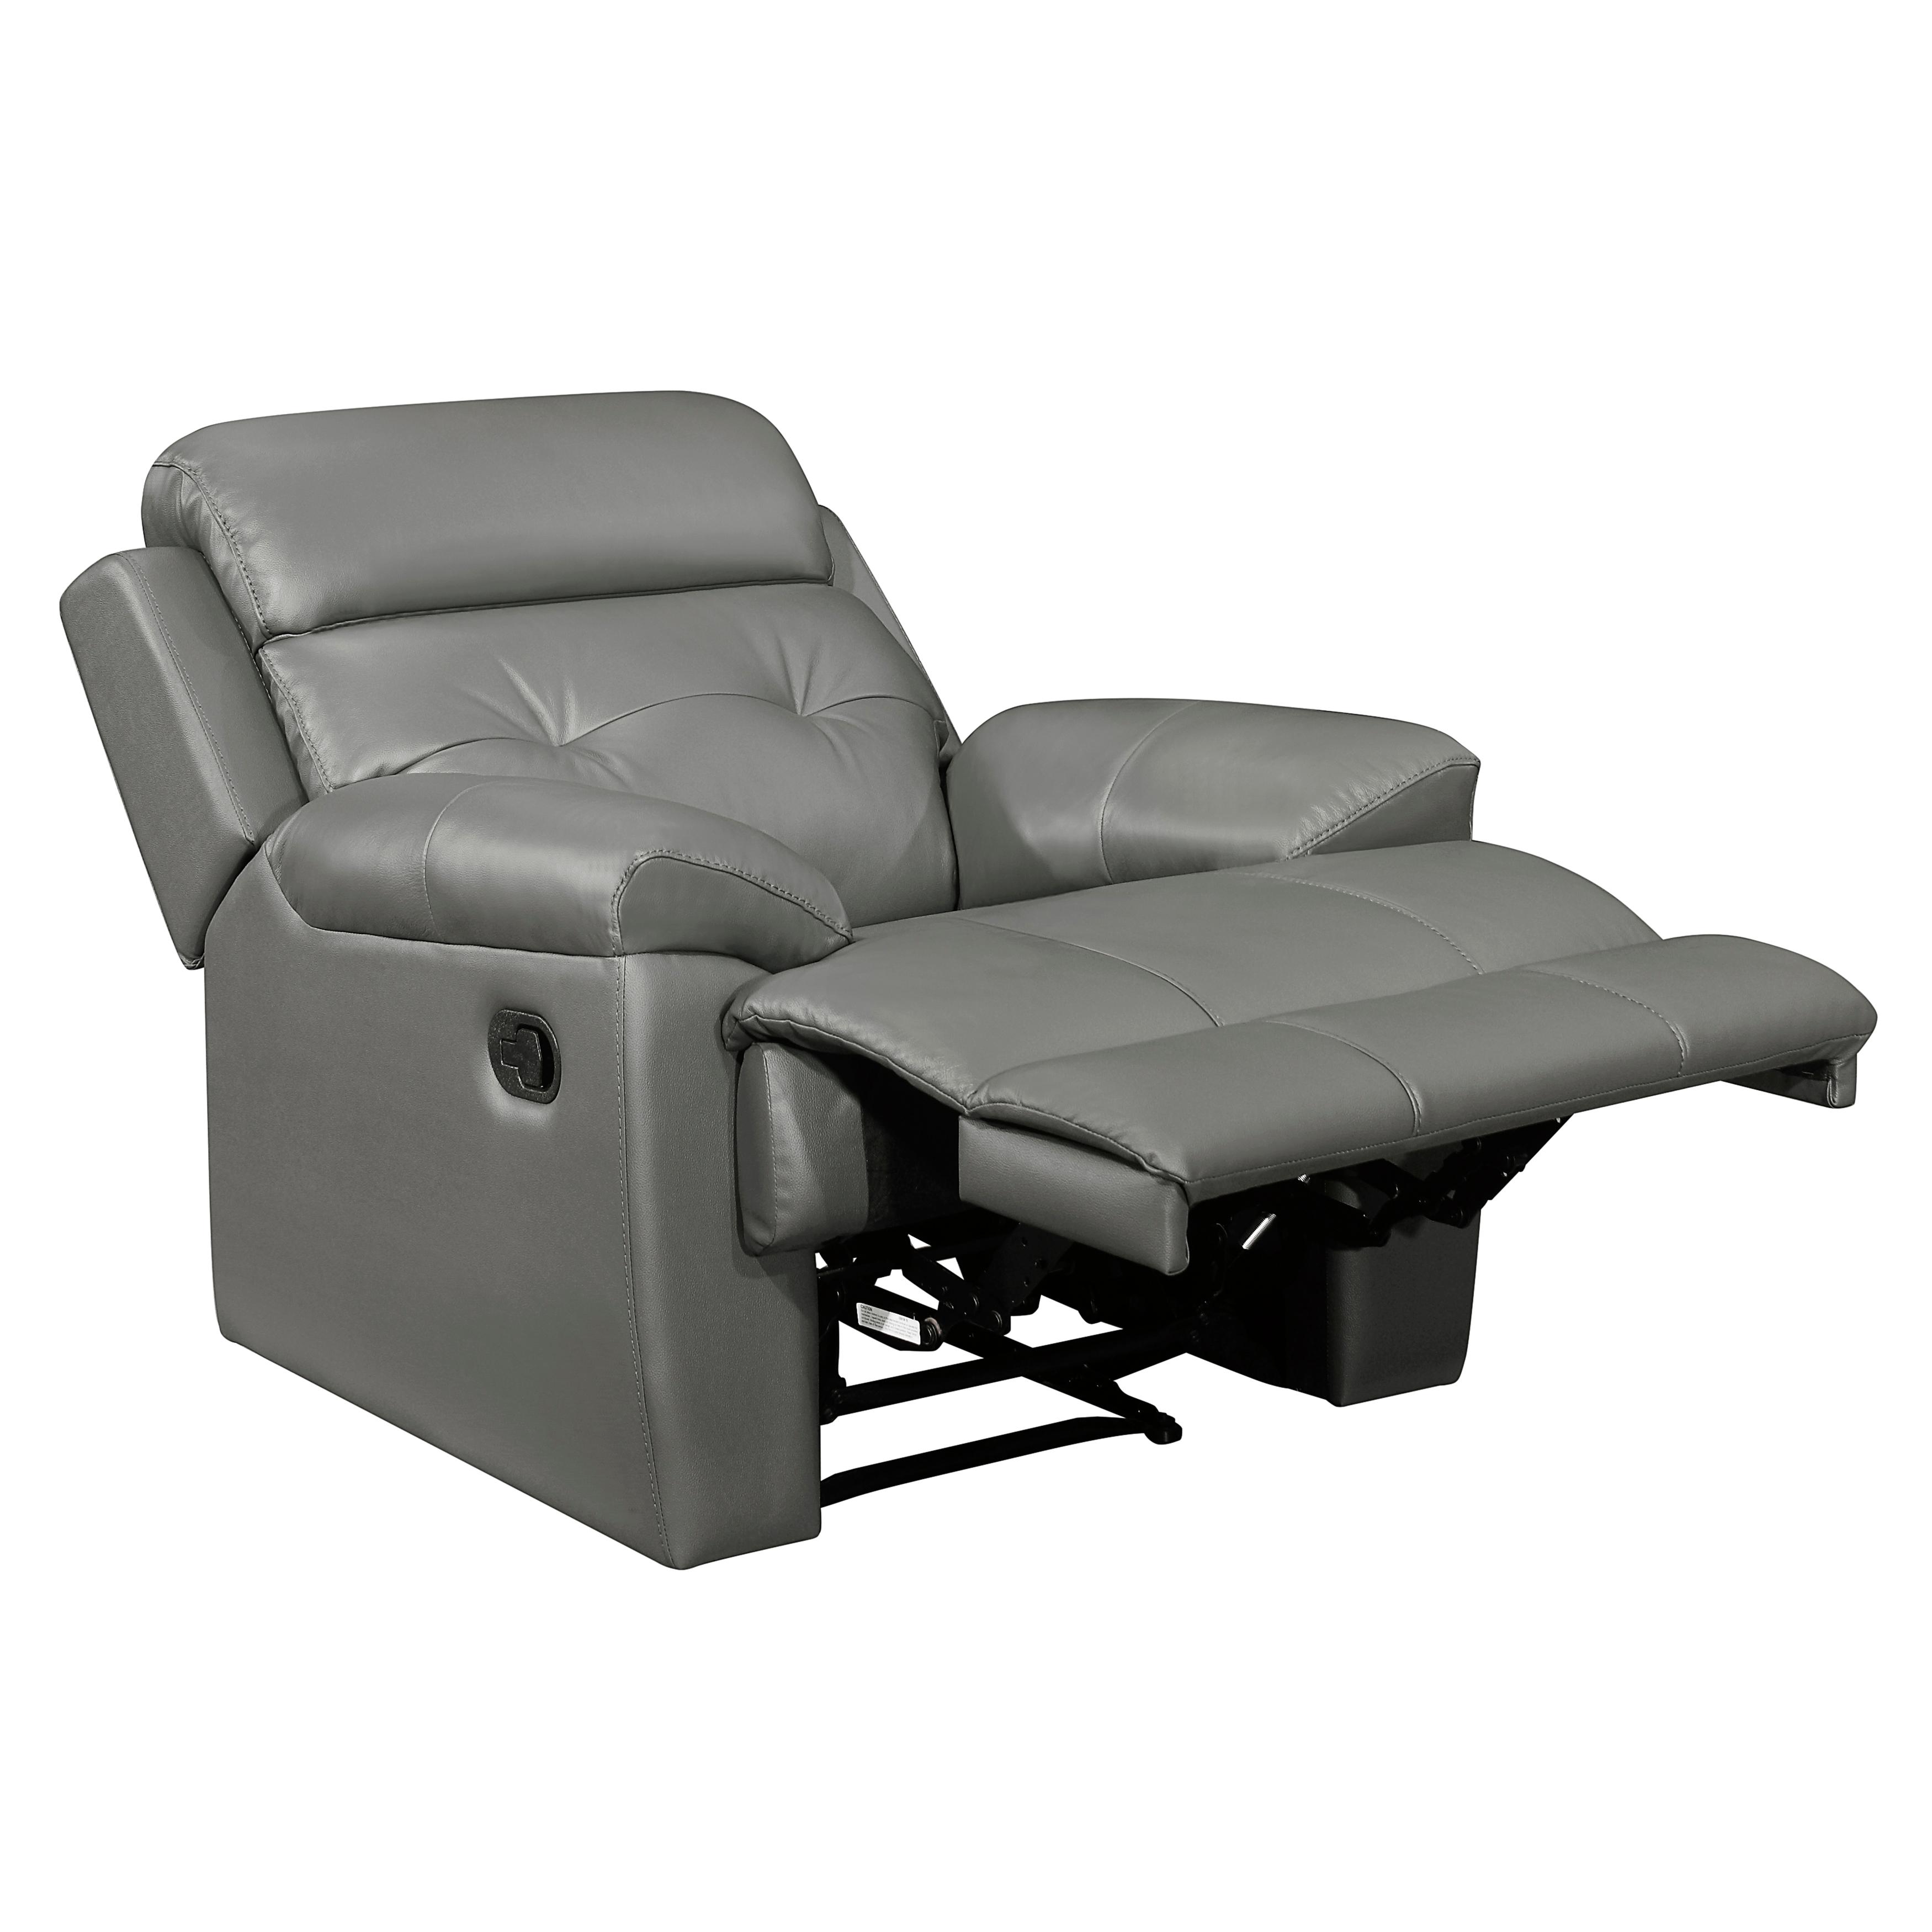 

    
Homelegance 9529GRY-1 Lambent Reclining Chair Gray 9529GRY-1
